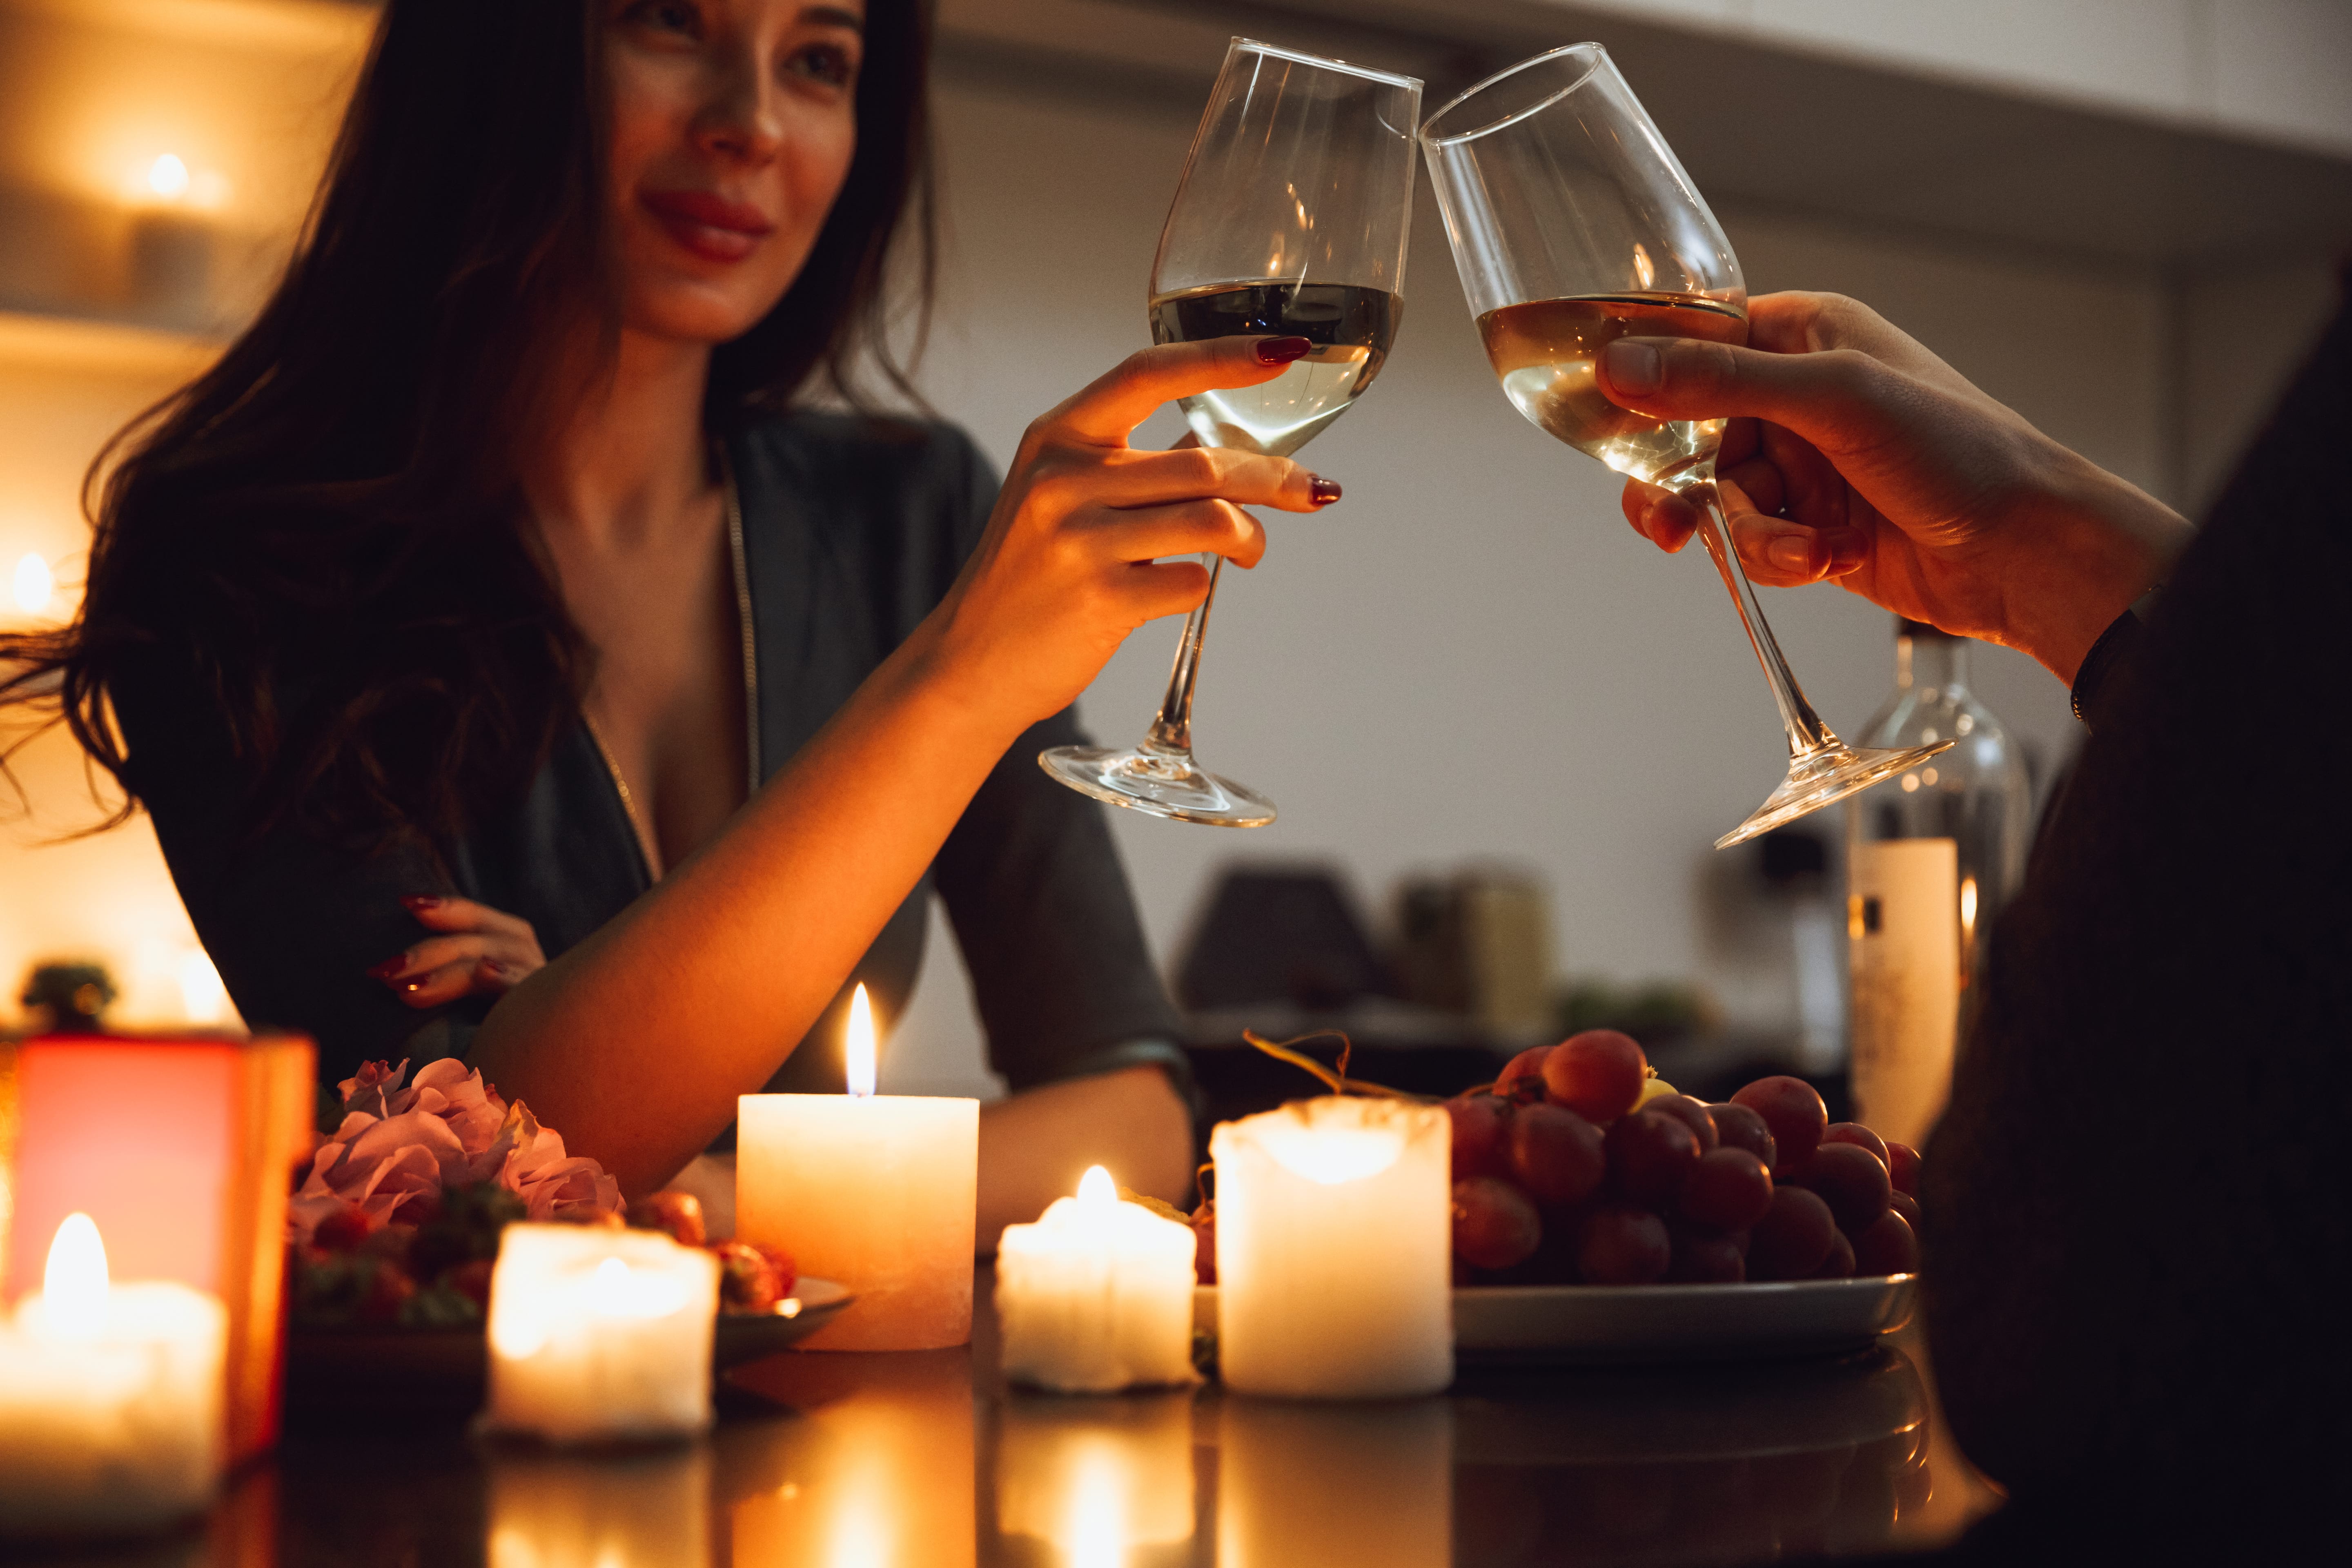 A couple clinking wind glasses by candlelight on a date. A bowl of grapes sits on the table top and is surrounded by multiple candles